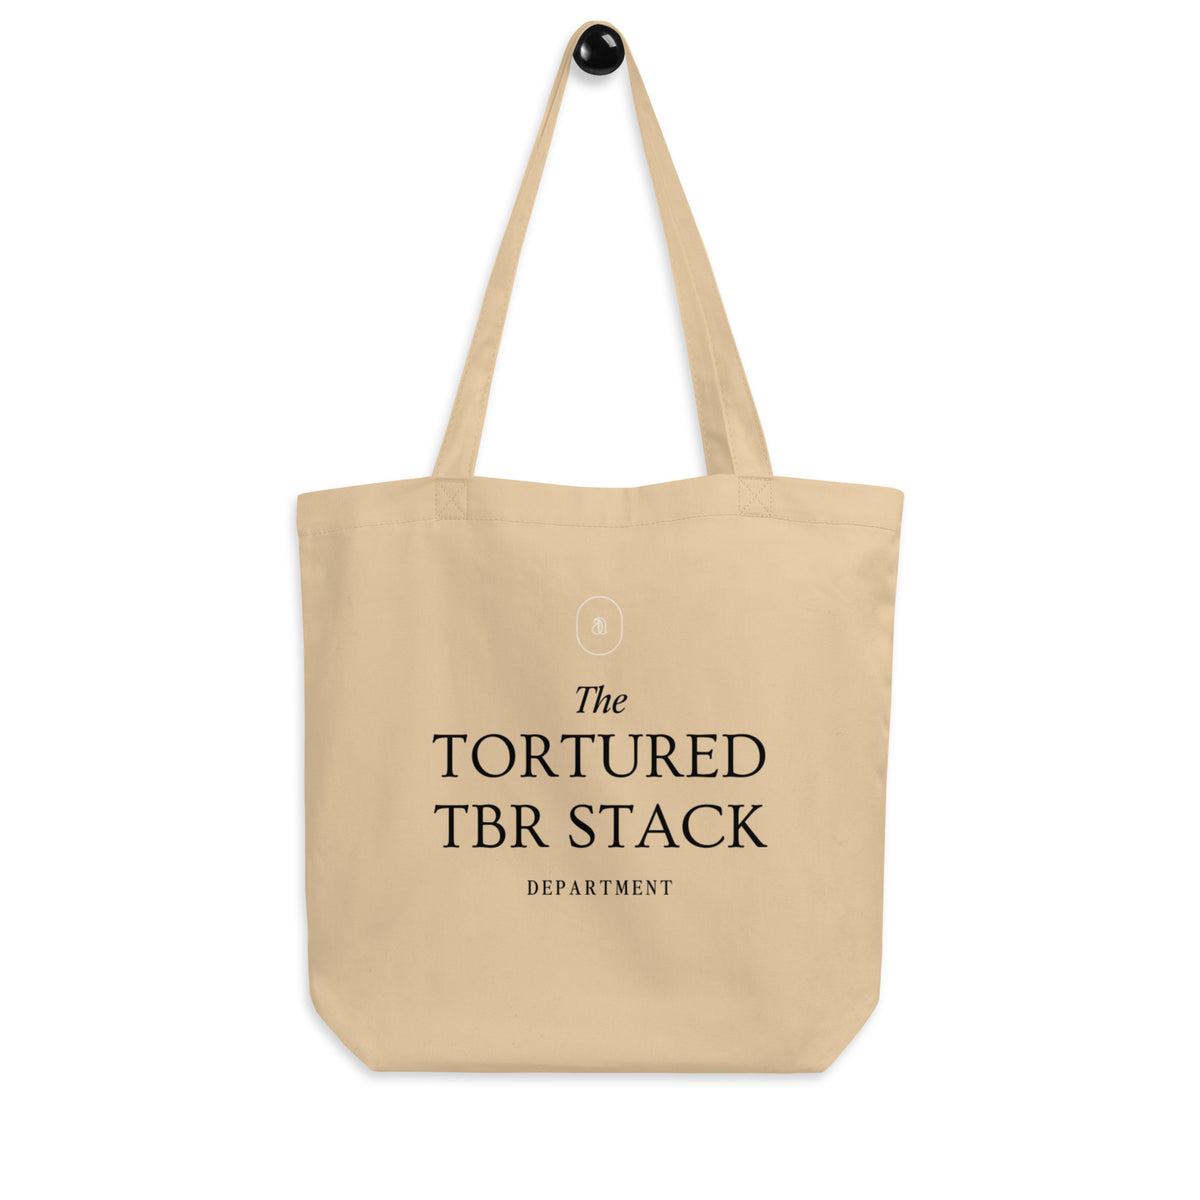 The Tortured TBR Stack Department - Eco Tote Bag